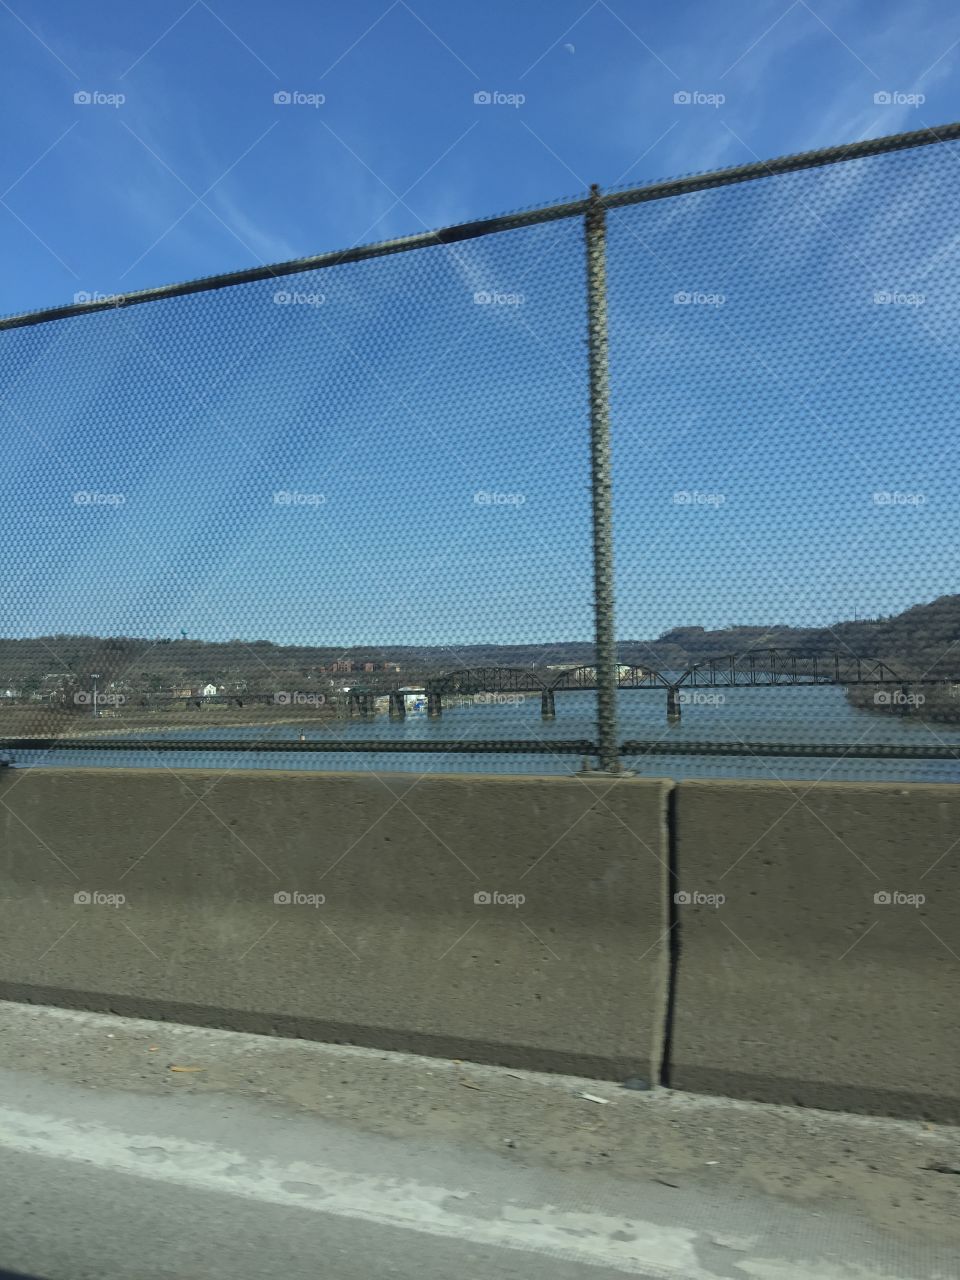 The view down the Alleghenies River